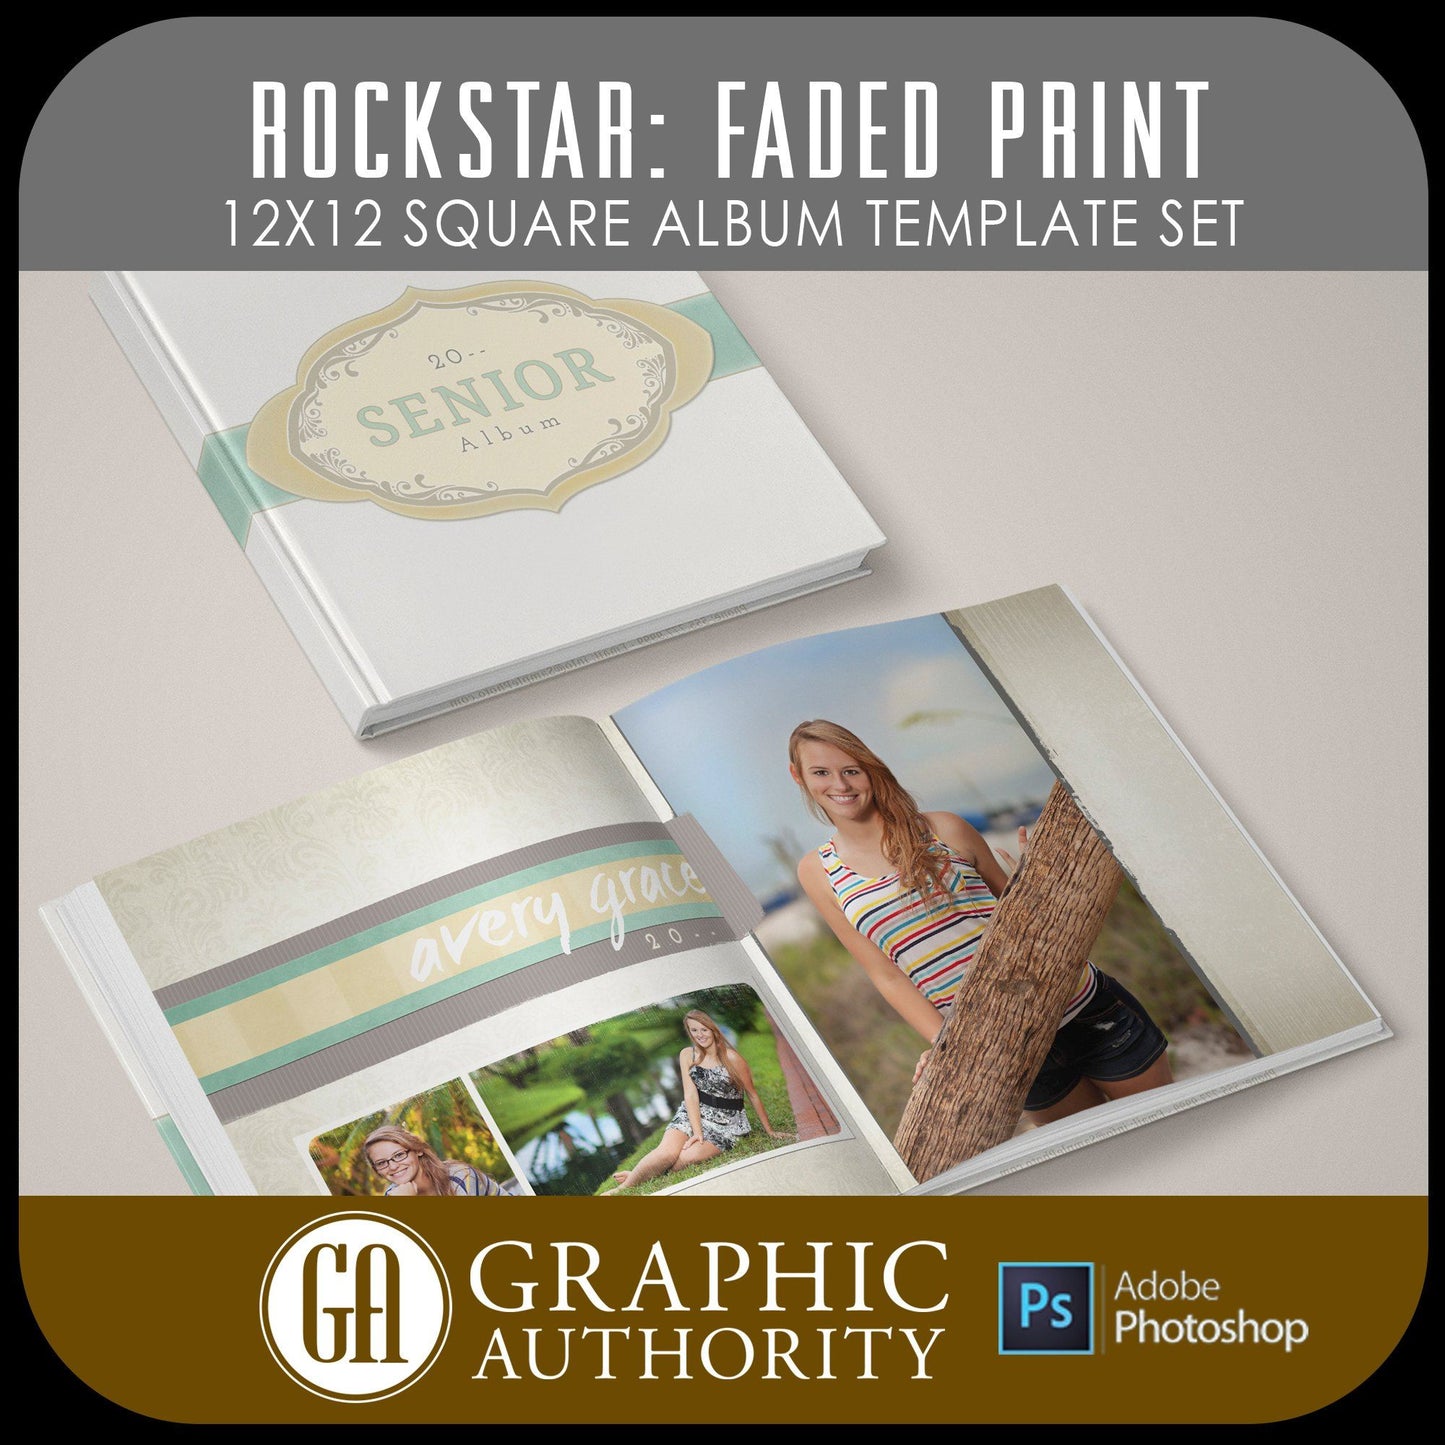 Rockstar - Faded Print - 12x24 - Album Spreads-Photoshop Template - Graphic Authority